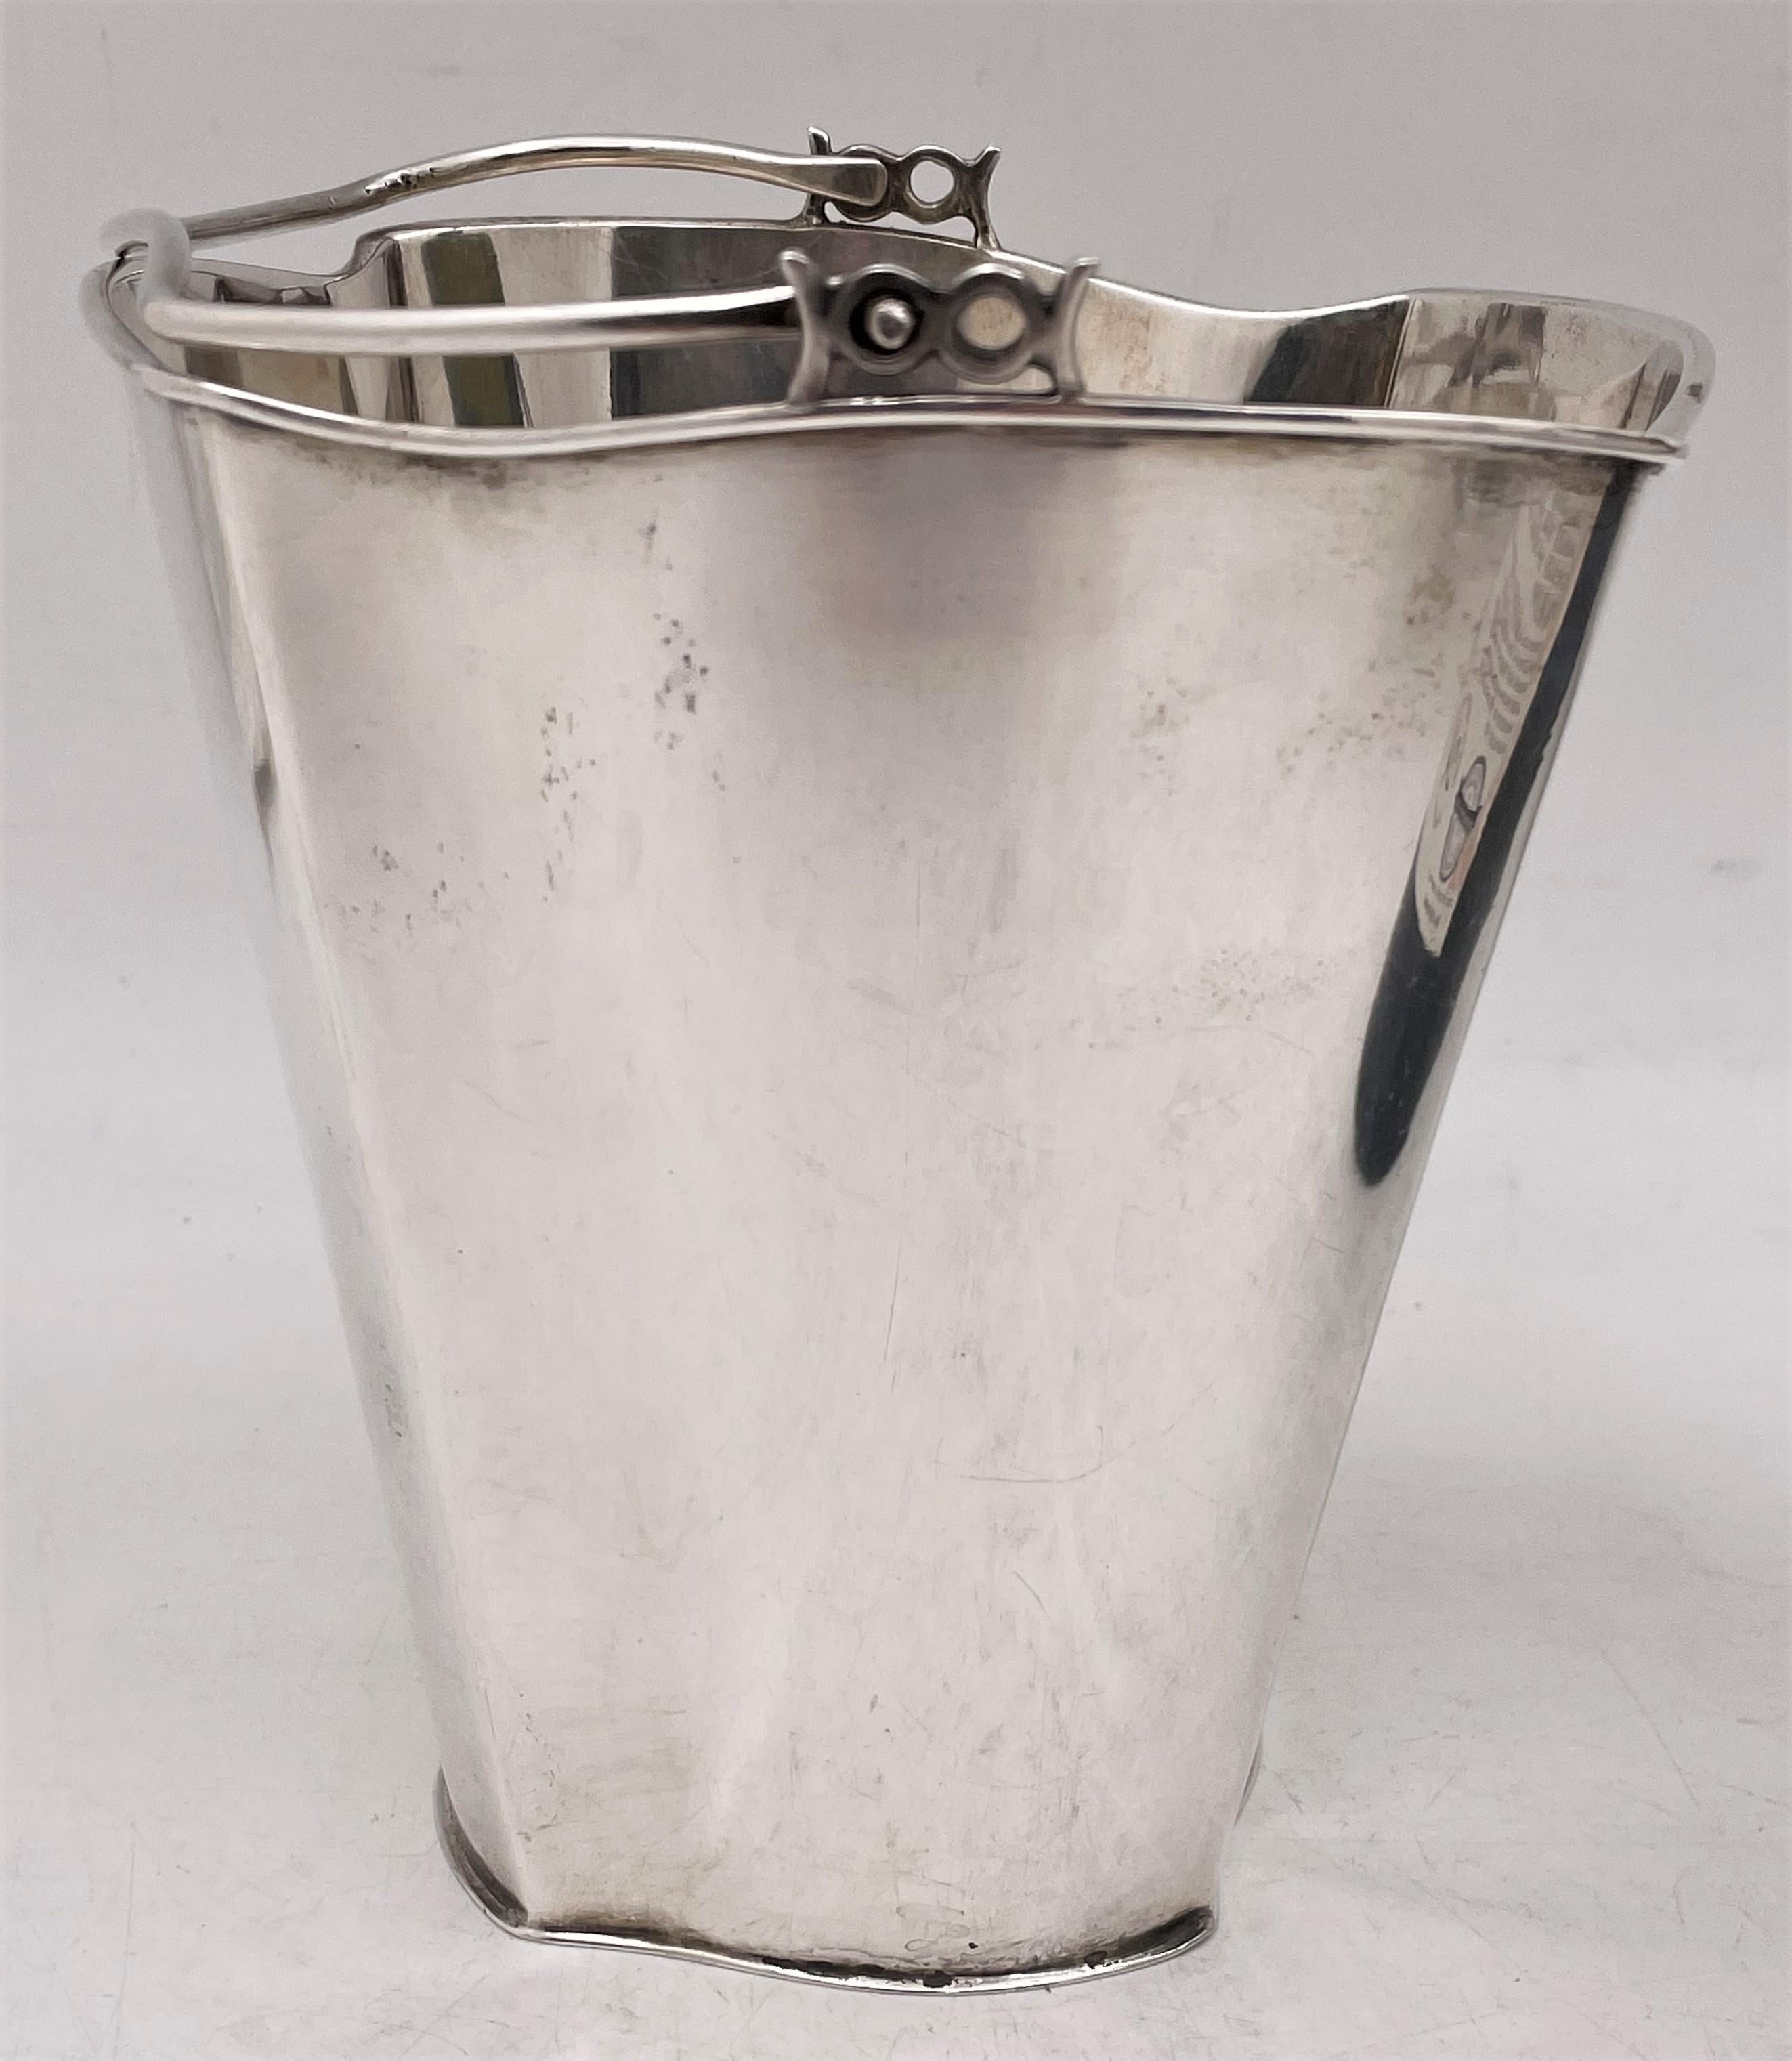 Italian, continental silver ice bucket or wine cooler in Mid-Century Modern style, made in Milan in the Mid-20th Century, by Eugenio e Angelo Orefice, with a curvilinear, geometric design. It measures 5 1/4'' in height by 3 1/2'' at the base (widest